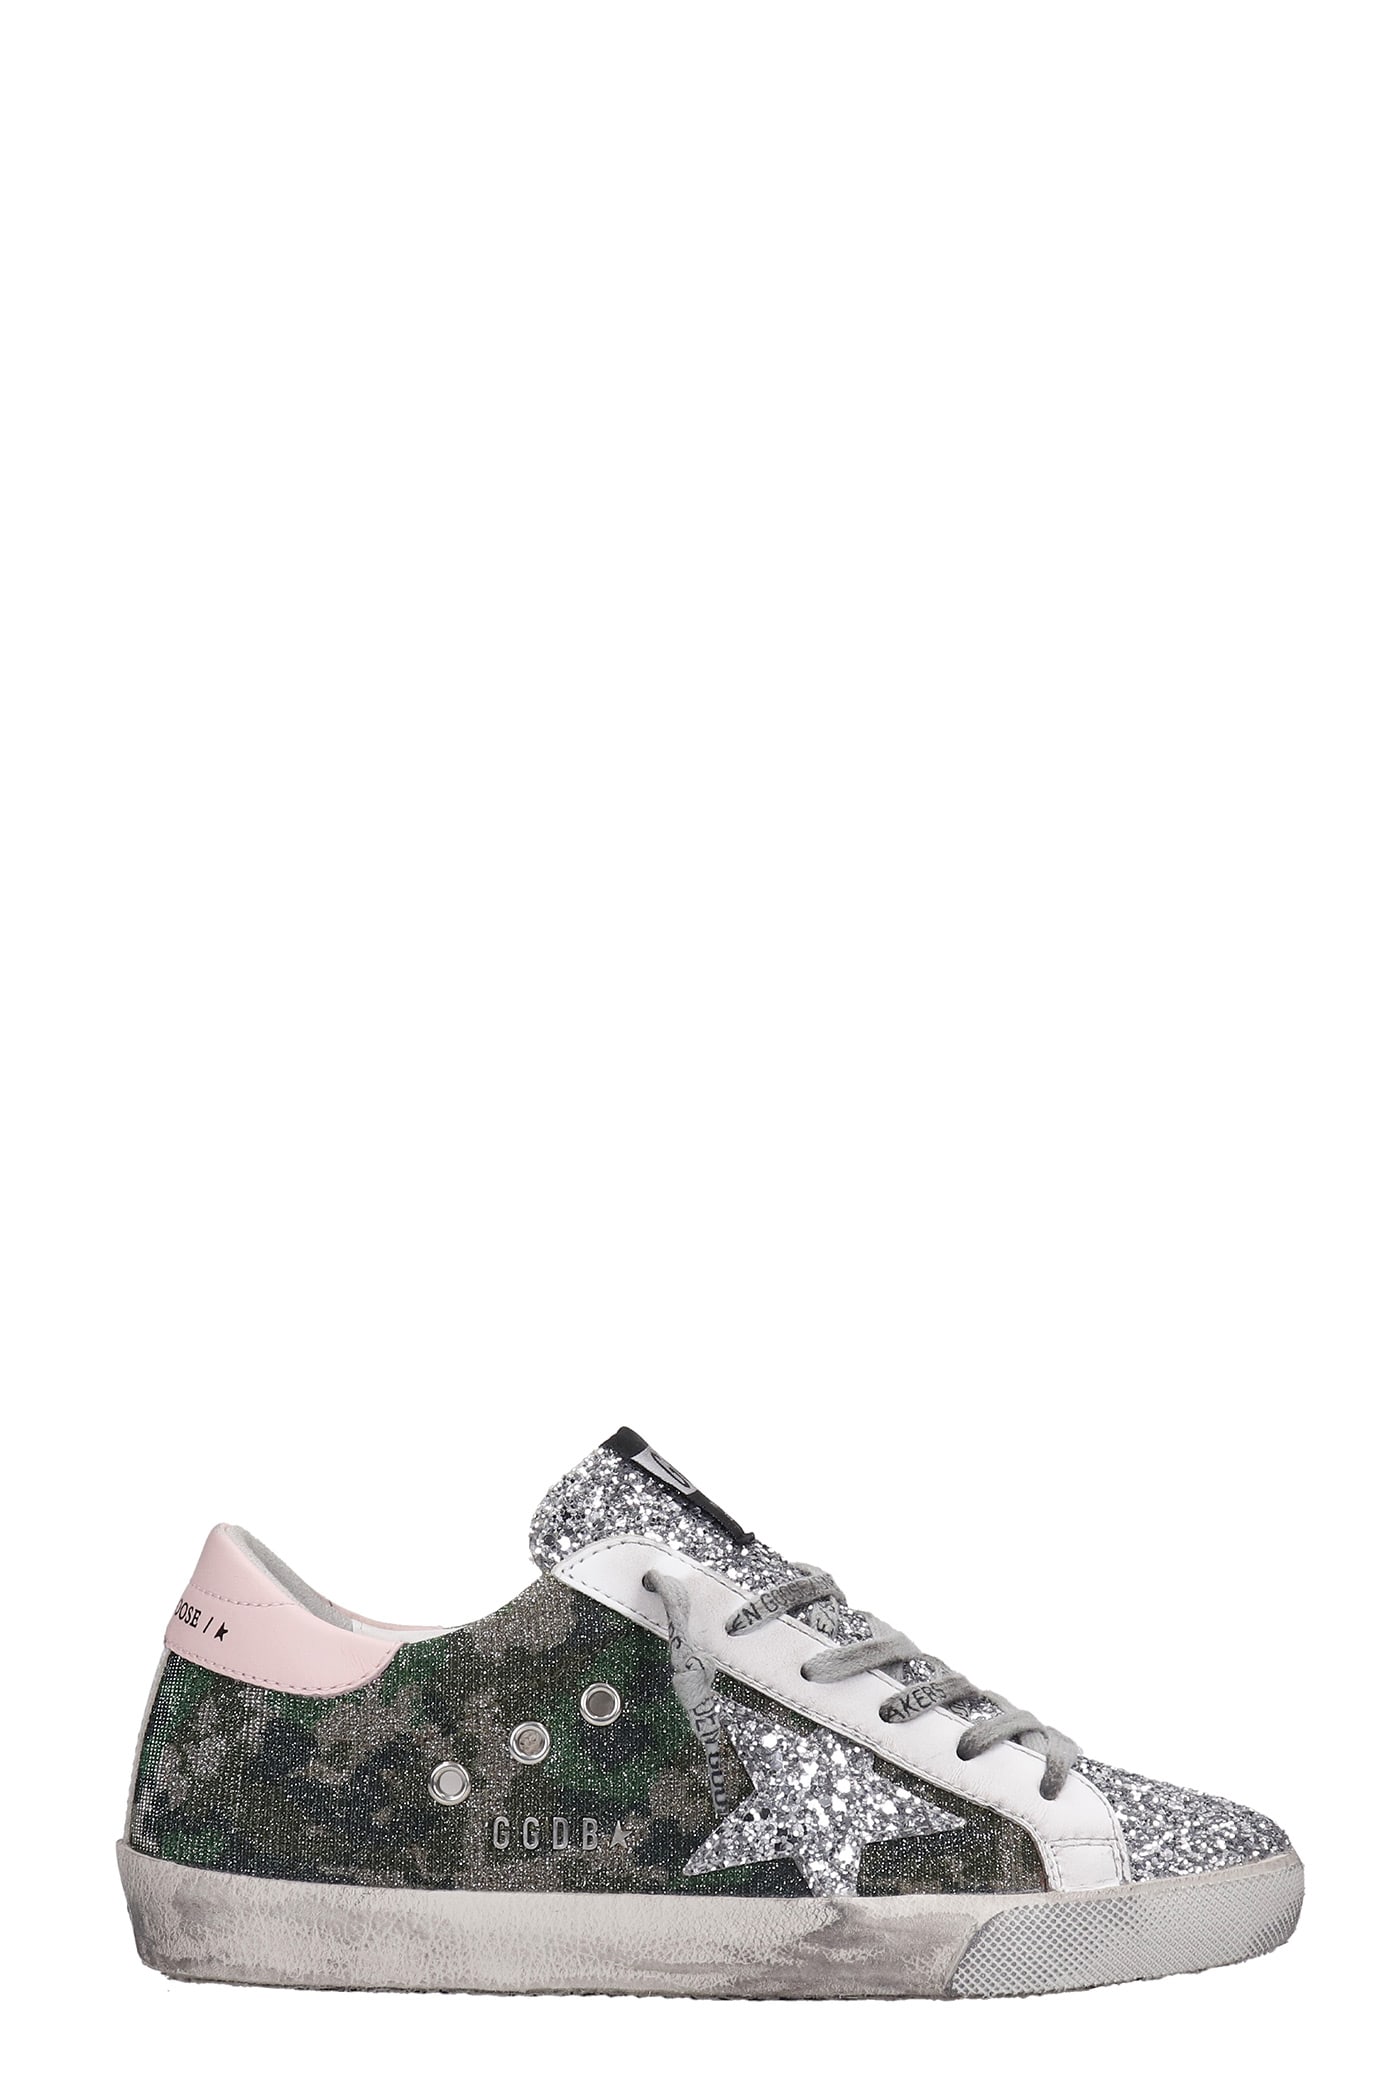 Buy Golden Goose Superstar Sneakers In Camouflage Glitter online, shop Golden Goose shoes with free shipping